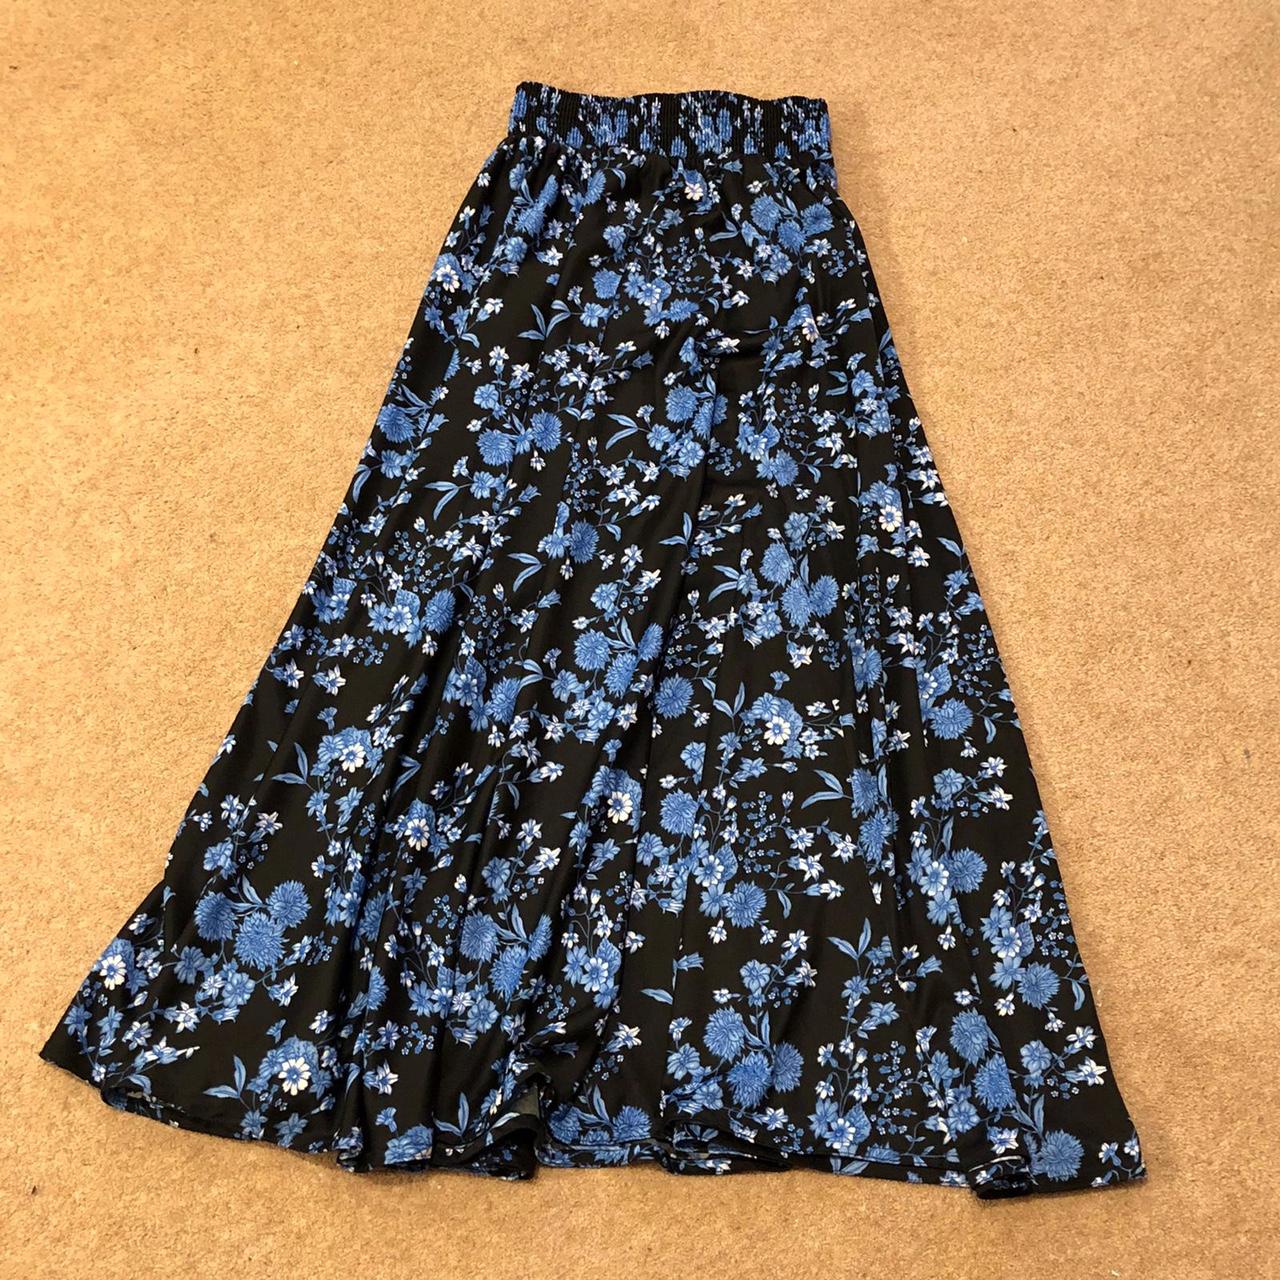 floral midi skirt + free shipping - the cutest blue... - Depop